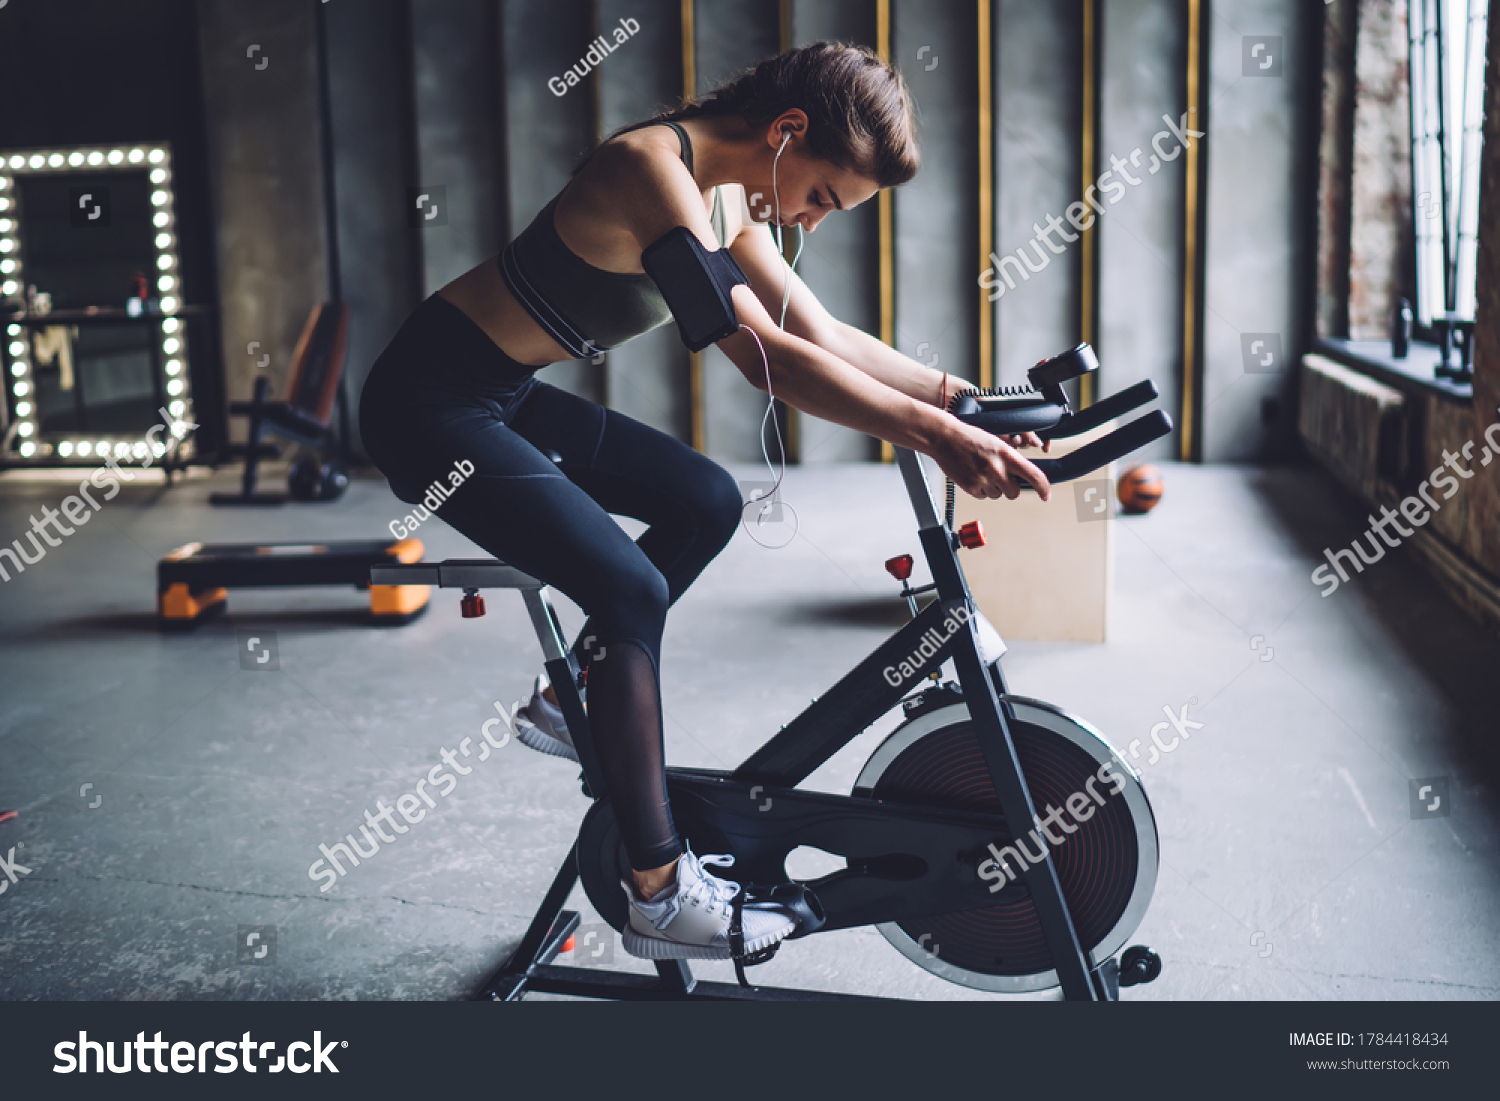 Concentrated fit female in sportswear with dark braided hair burning calories on spin bike and listening to music in headphones #1784418434